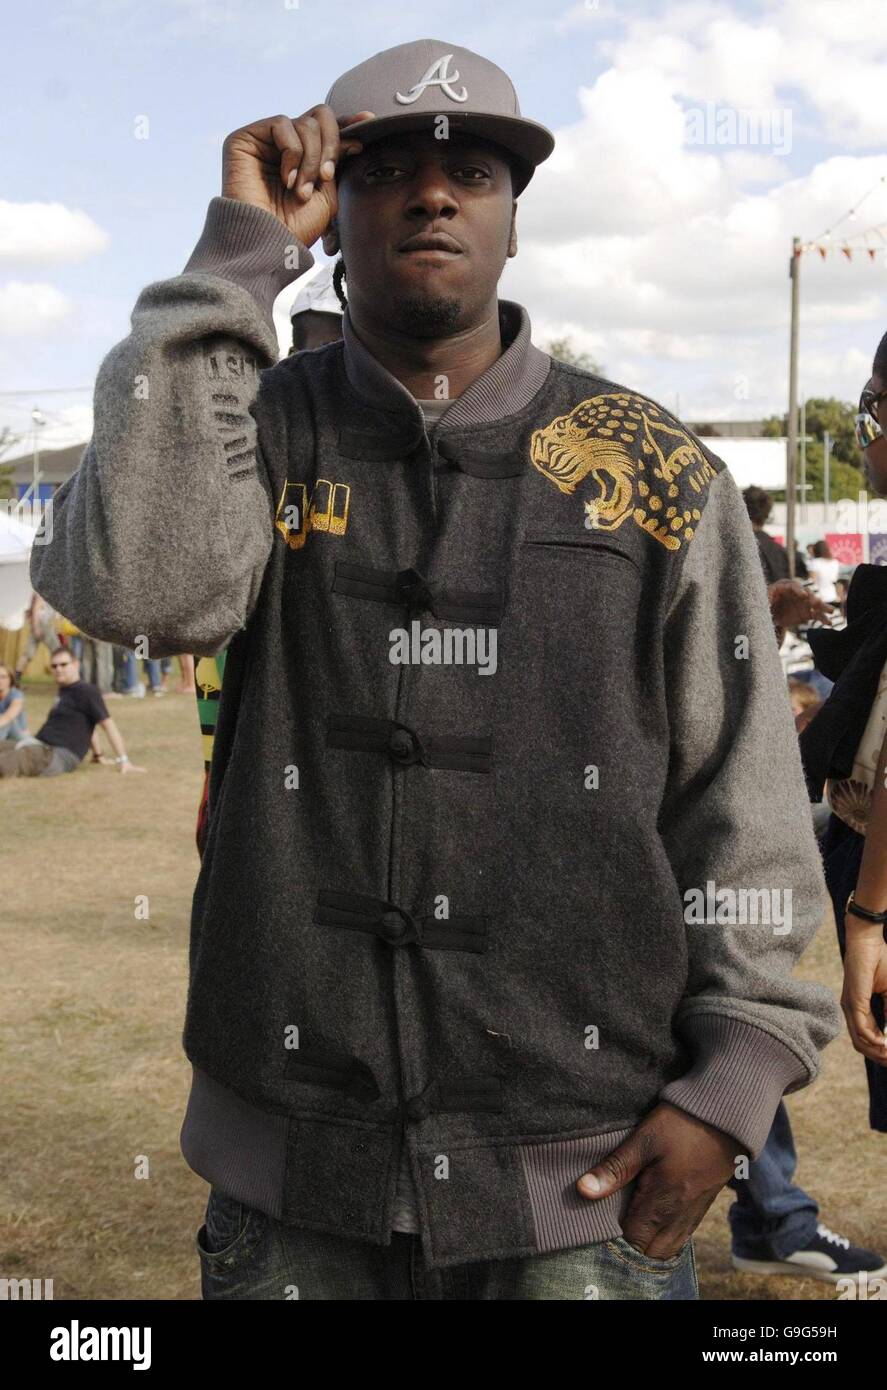 Carling Reading Festival. Rapper Sway beim Carling Reading Festival, Reading. Stockfoto